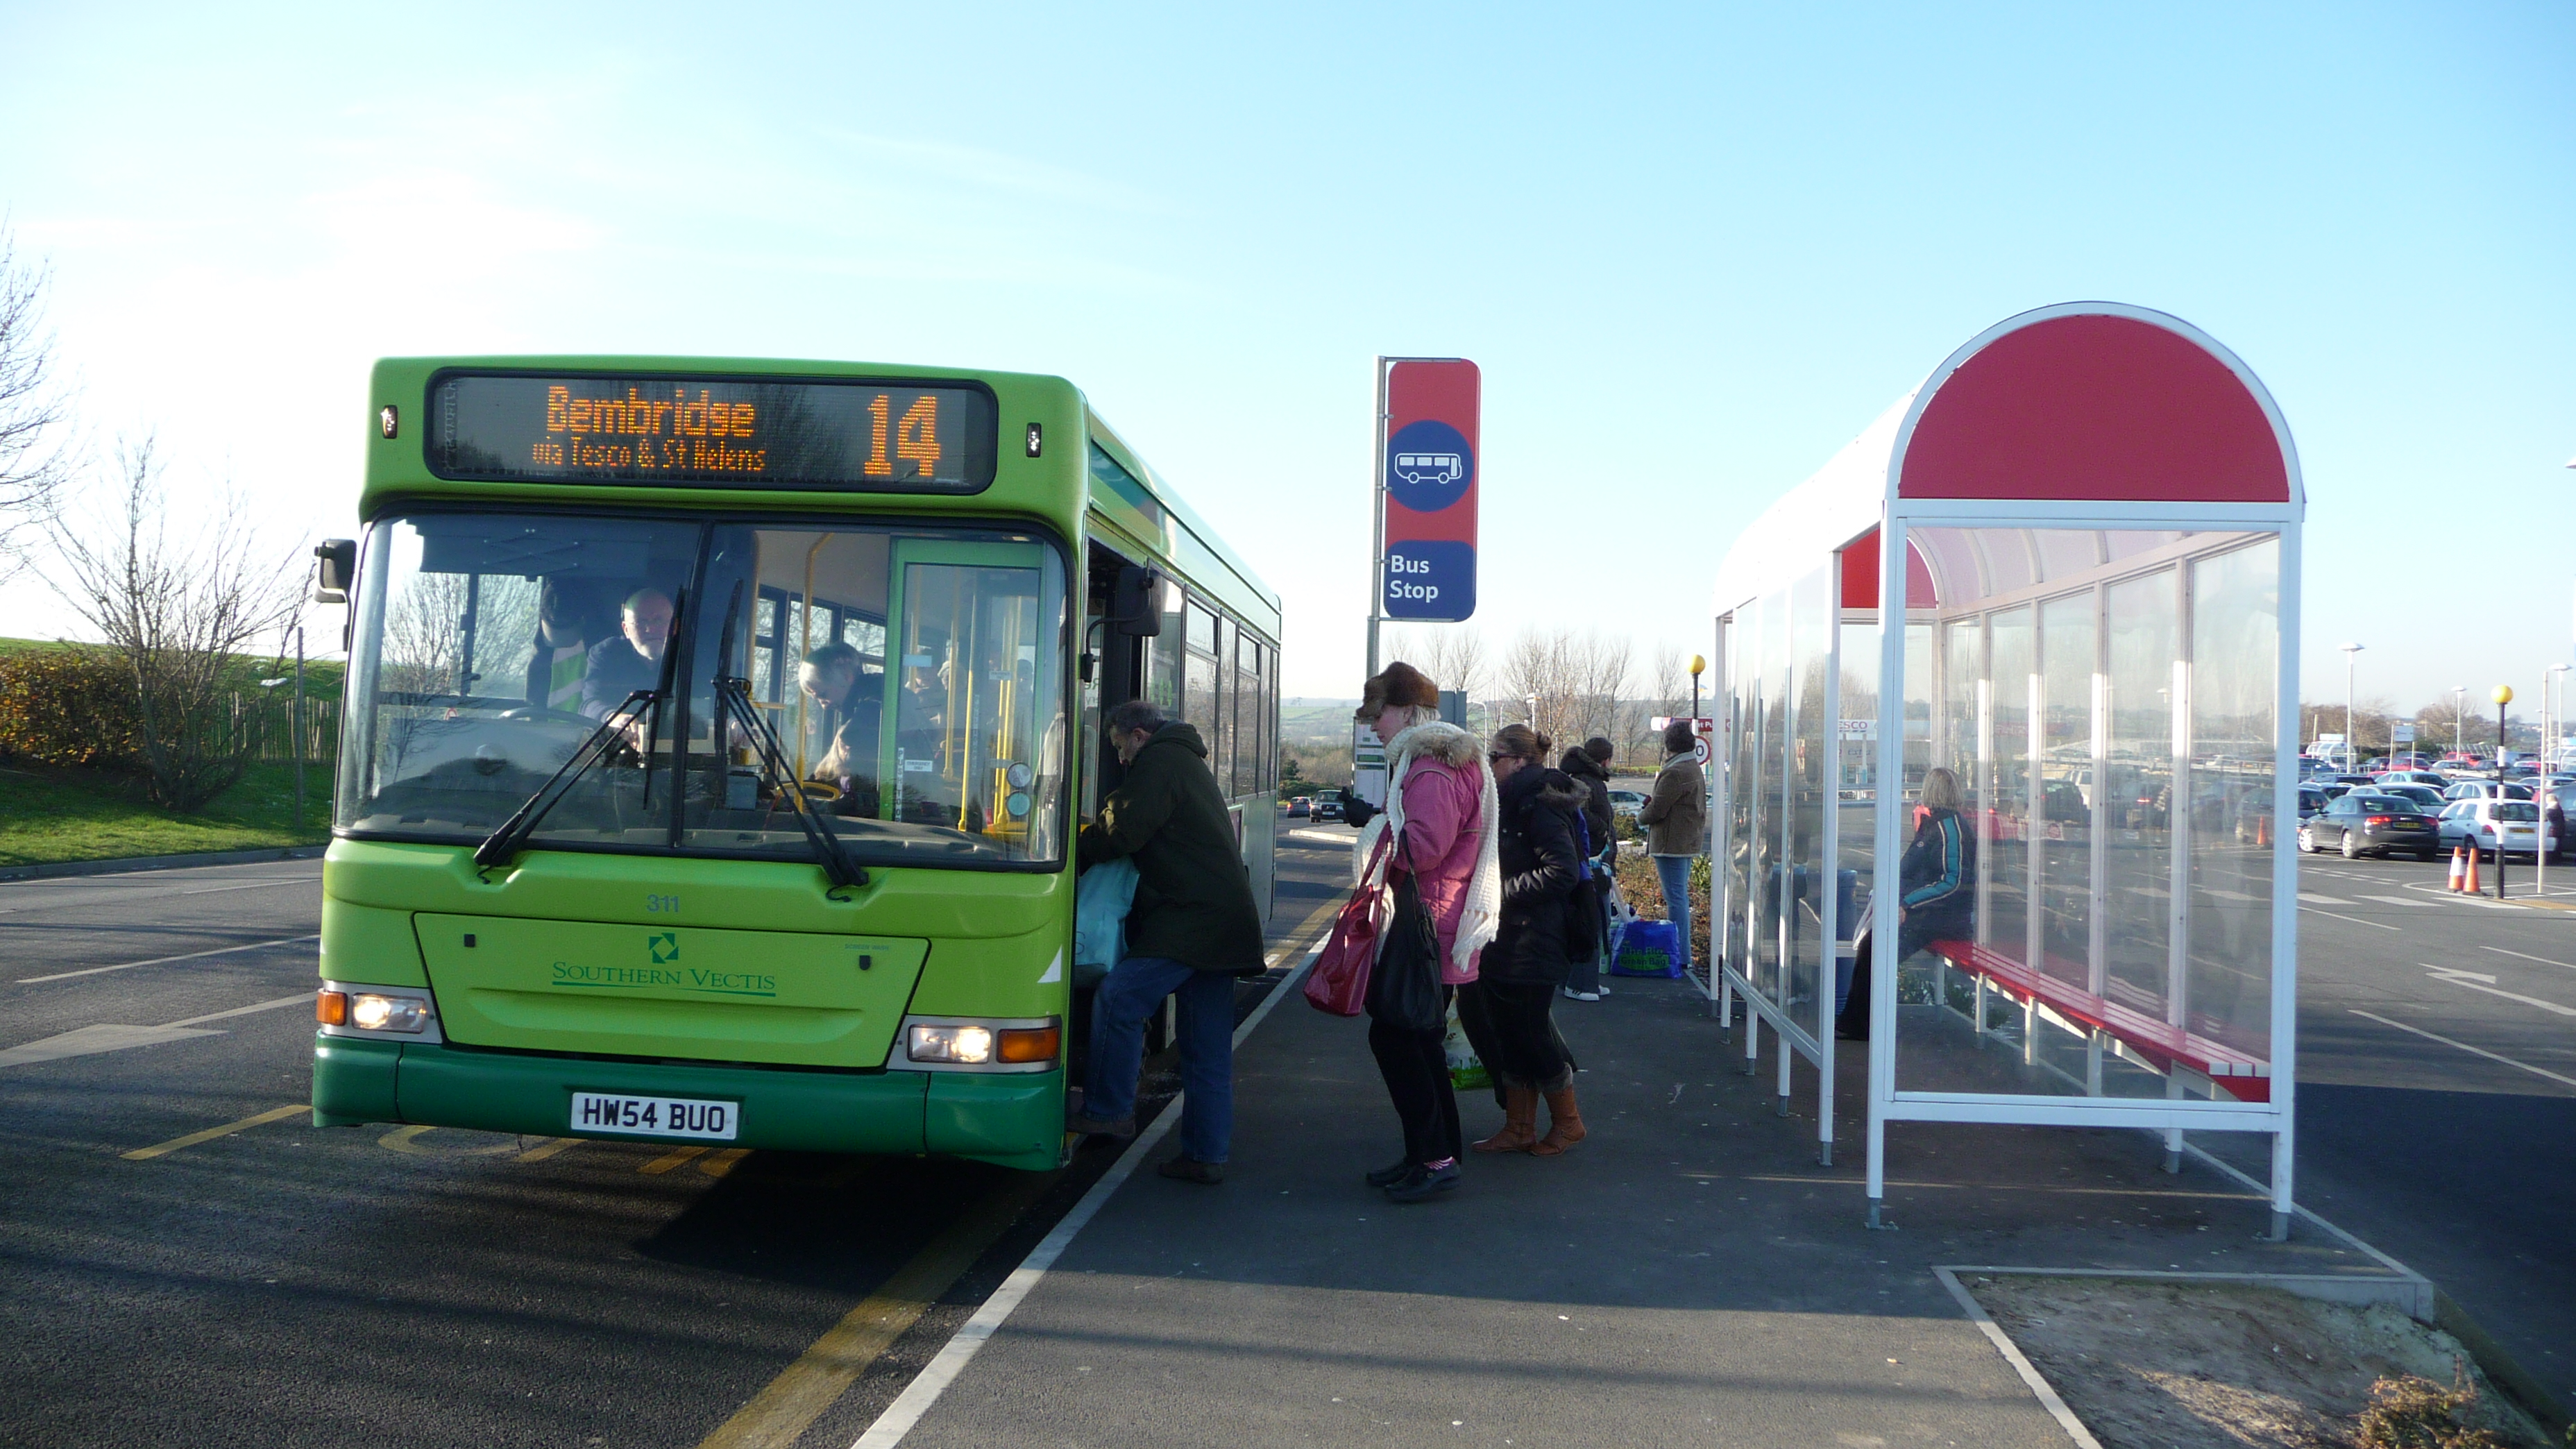 File:Southern Vectis 311 HW54 BUO and Ryde Tesco bus stop.JPG ...